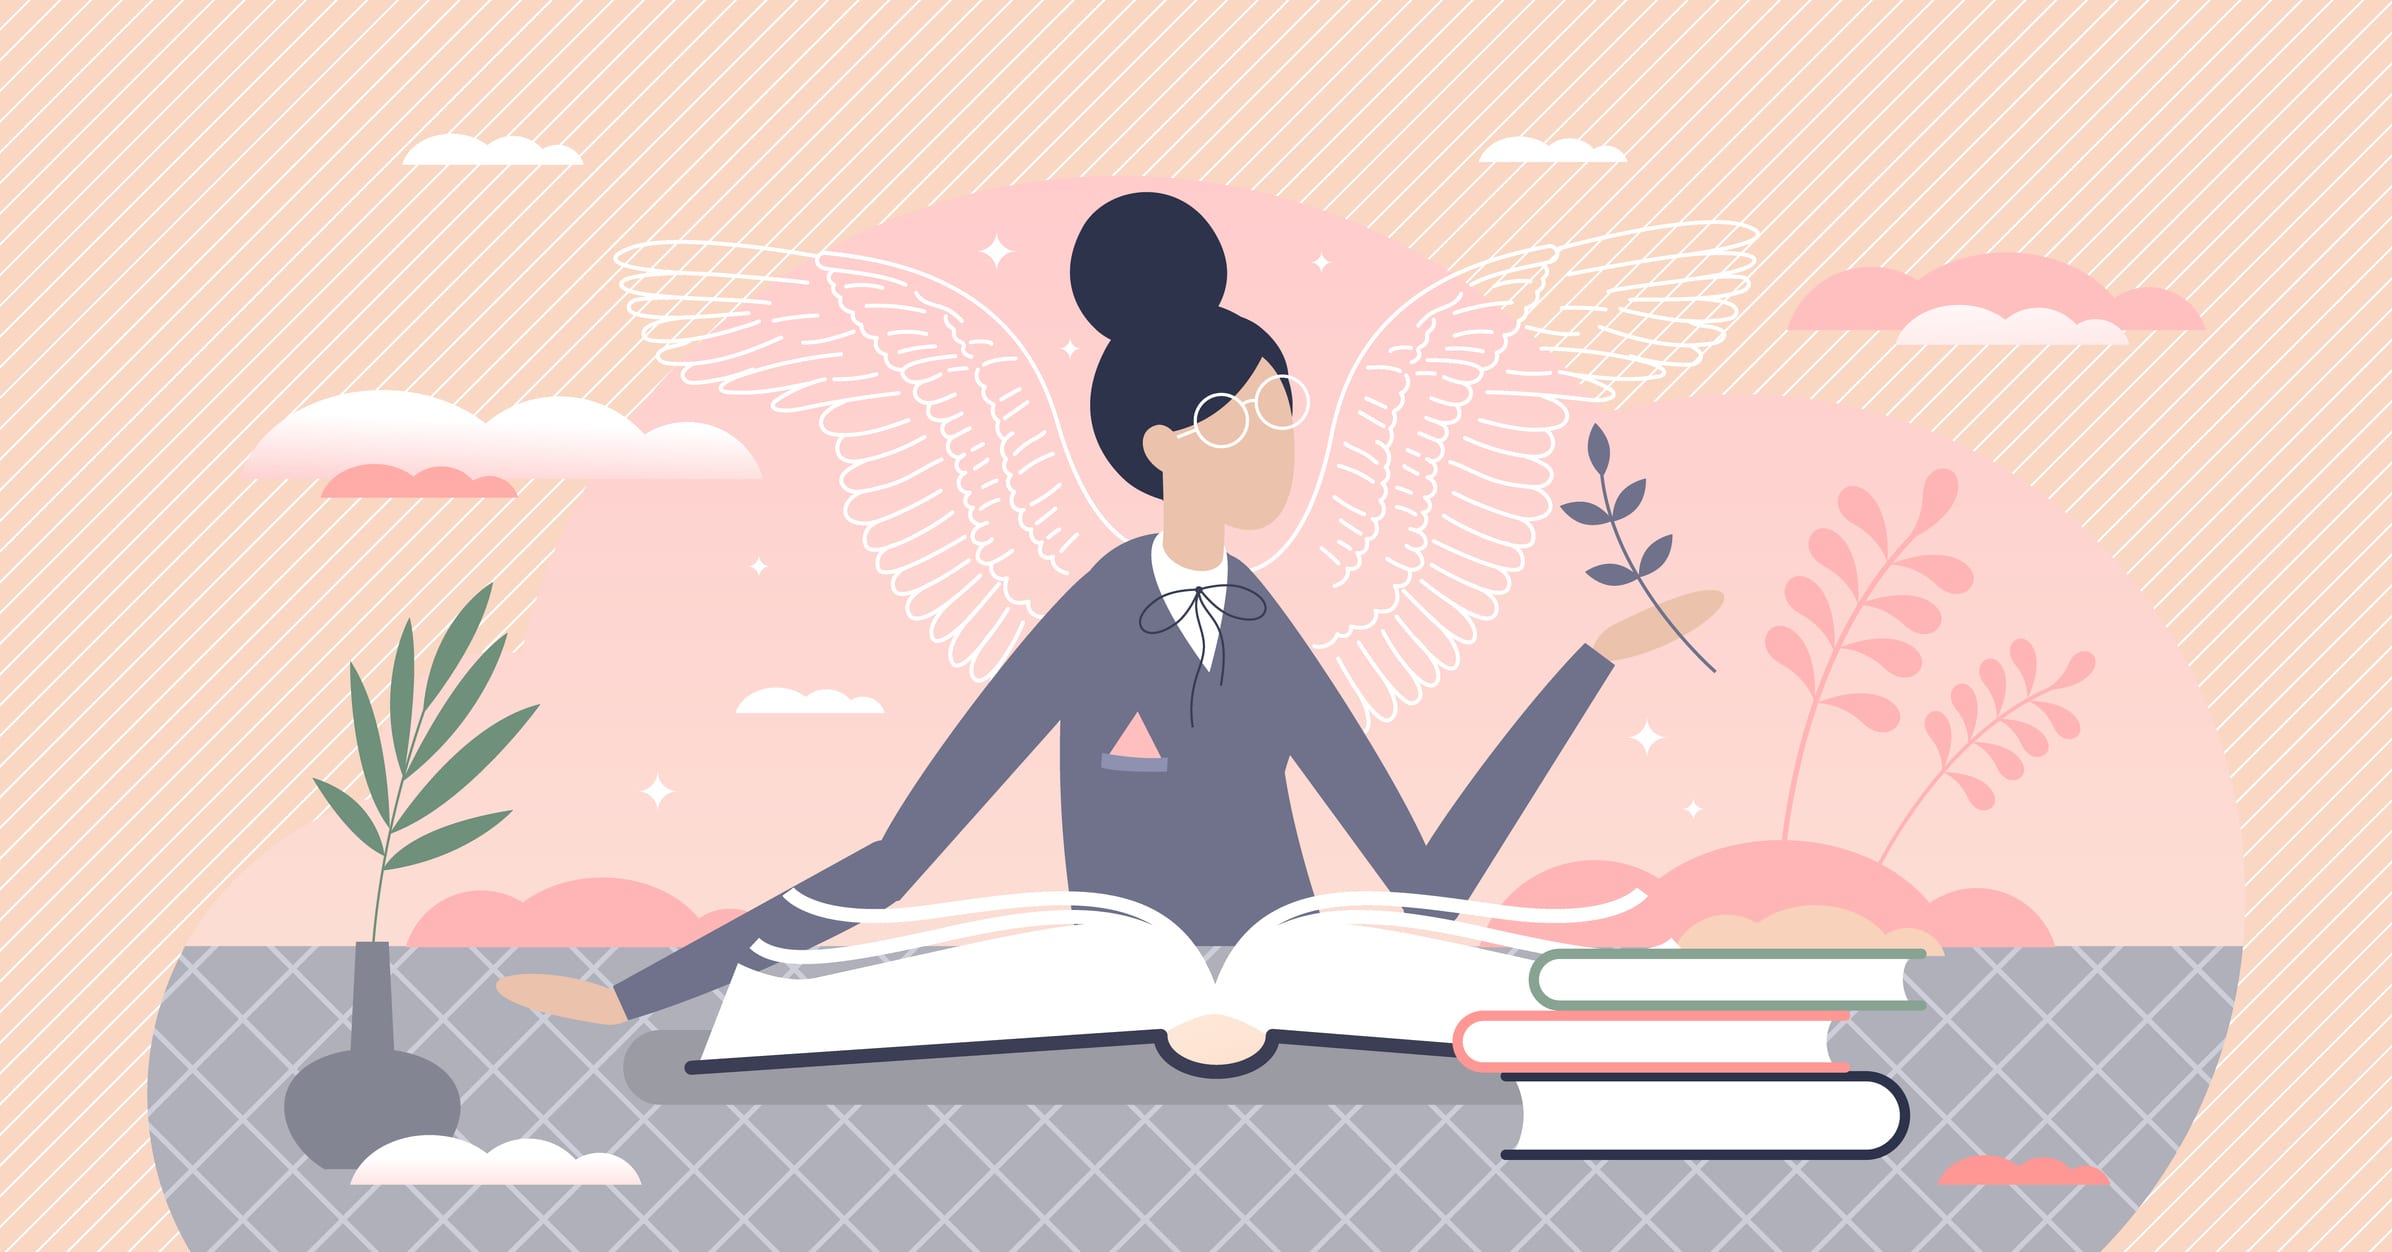 Reading books and literature to grow creative imagination tiny person concept. Literature art for motivation and inspiration as symbolic fantasy wings growth vector illustration. Expand mind horizon.